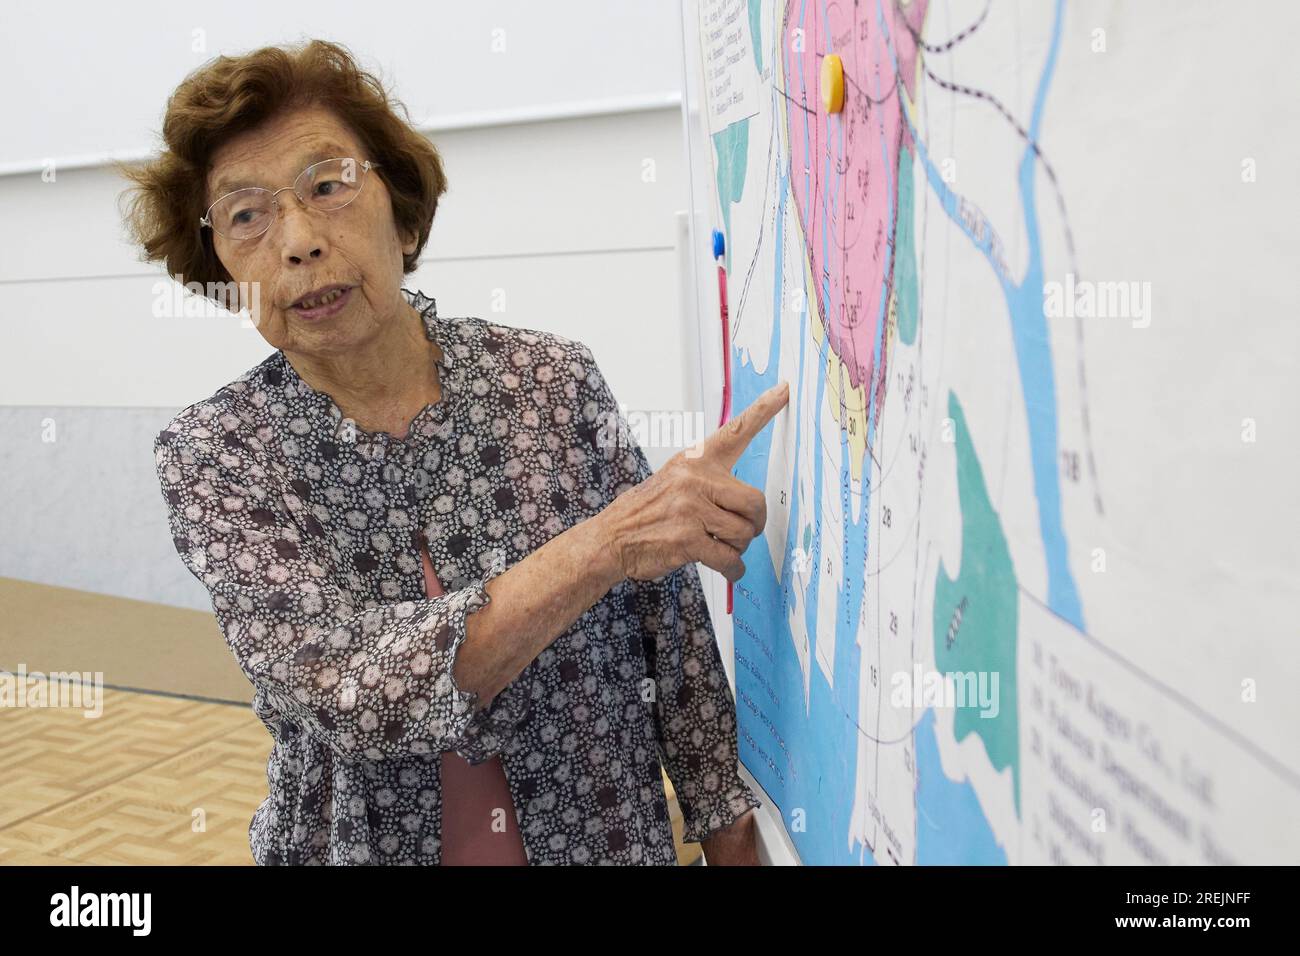 July 27, 2023, Hiroshima, Japan: Sadae Kasaoka an atomic bomb survivor, points out on a map her home at the moment of the atomic bombing in 1945, during a special meeting with foreign journalists at Hiroshima Peace Memorial Museum. This year will mark 78 years since the atomic bombing of Hiroshima (August 6, 1945) during WWII. Japan is the only country attacked by atomic bombs. A group of foreign journalists visited the city of Hiroshima (in a press tour) ahead of the memorial ceremony. The press tour was organized by the Ministry of Foreign Affairs of Japan with the support of the Foreign Pre Stock Photo